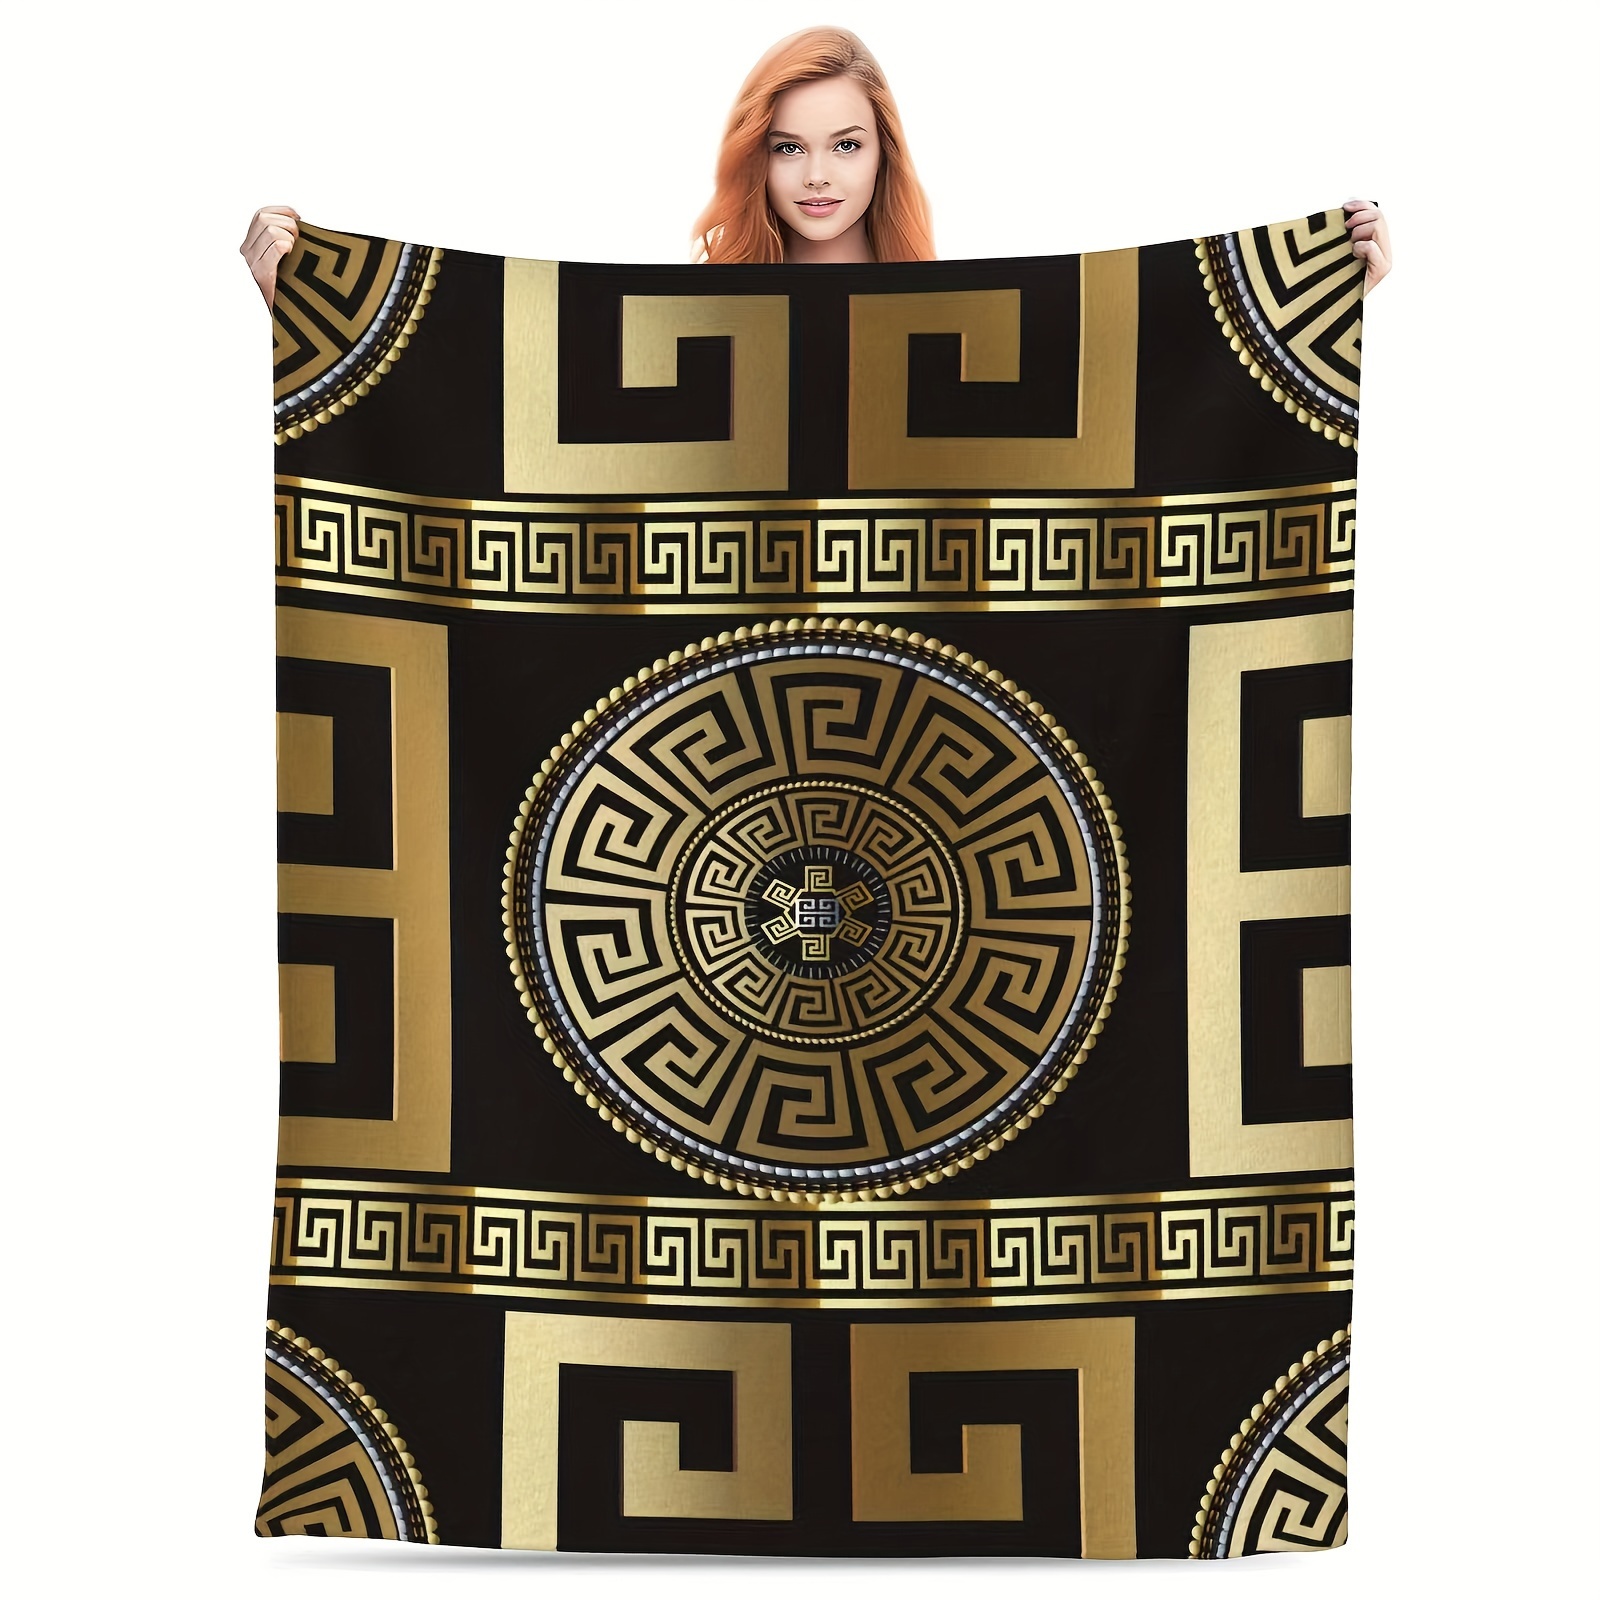 

luxurious Retro" Ultra-soft Vintage Geometric Flannel Throw Blanket - Black & Gold Greek Key Design, Allergy-friendly, Perfect For Couch, Bed, And Living Room Decor